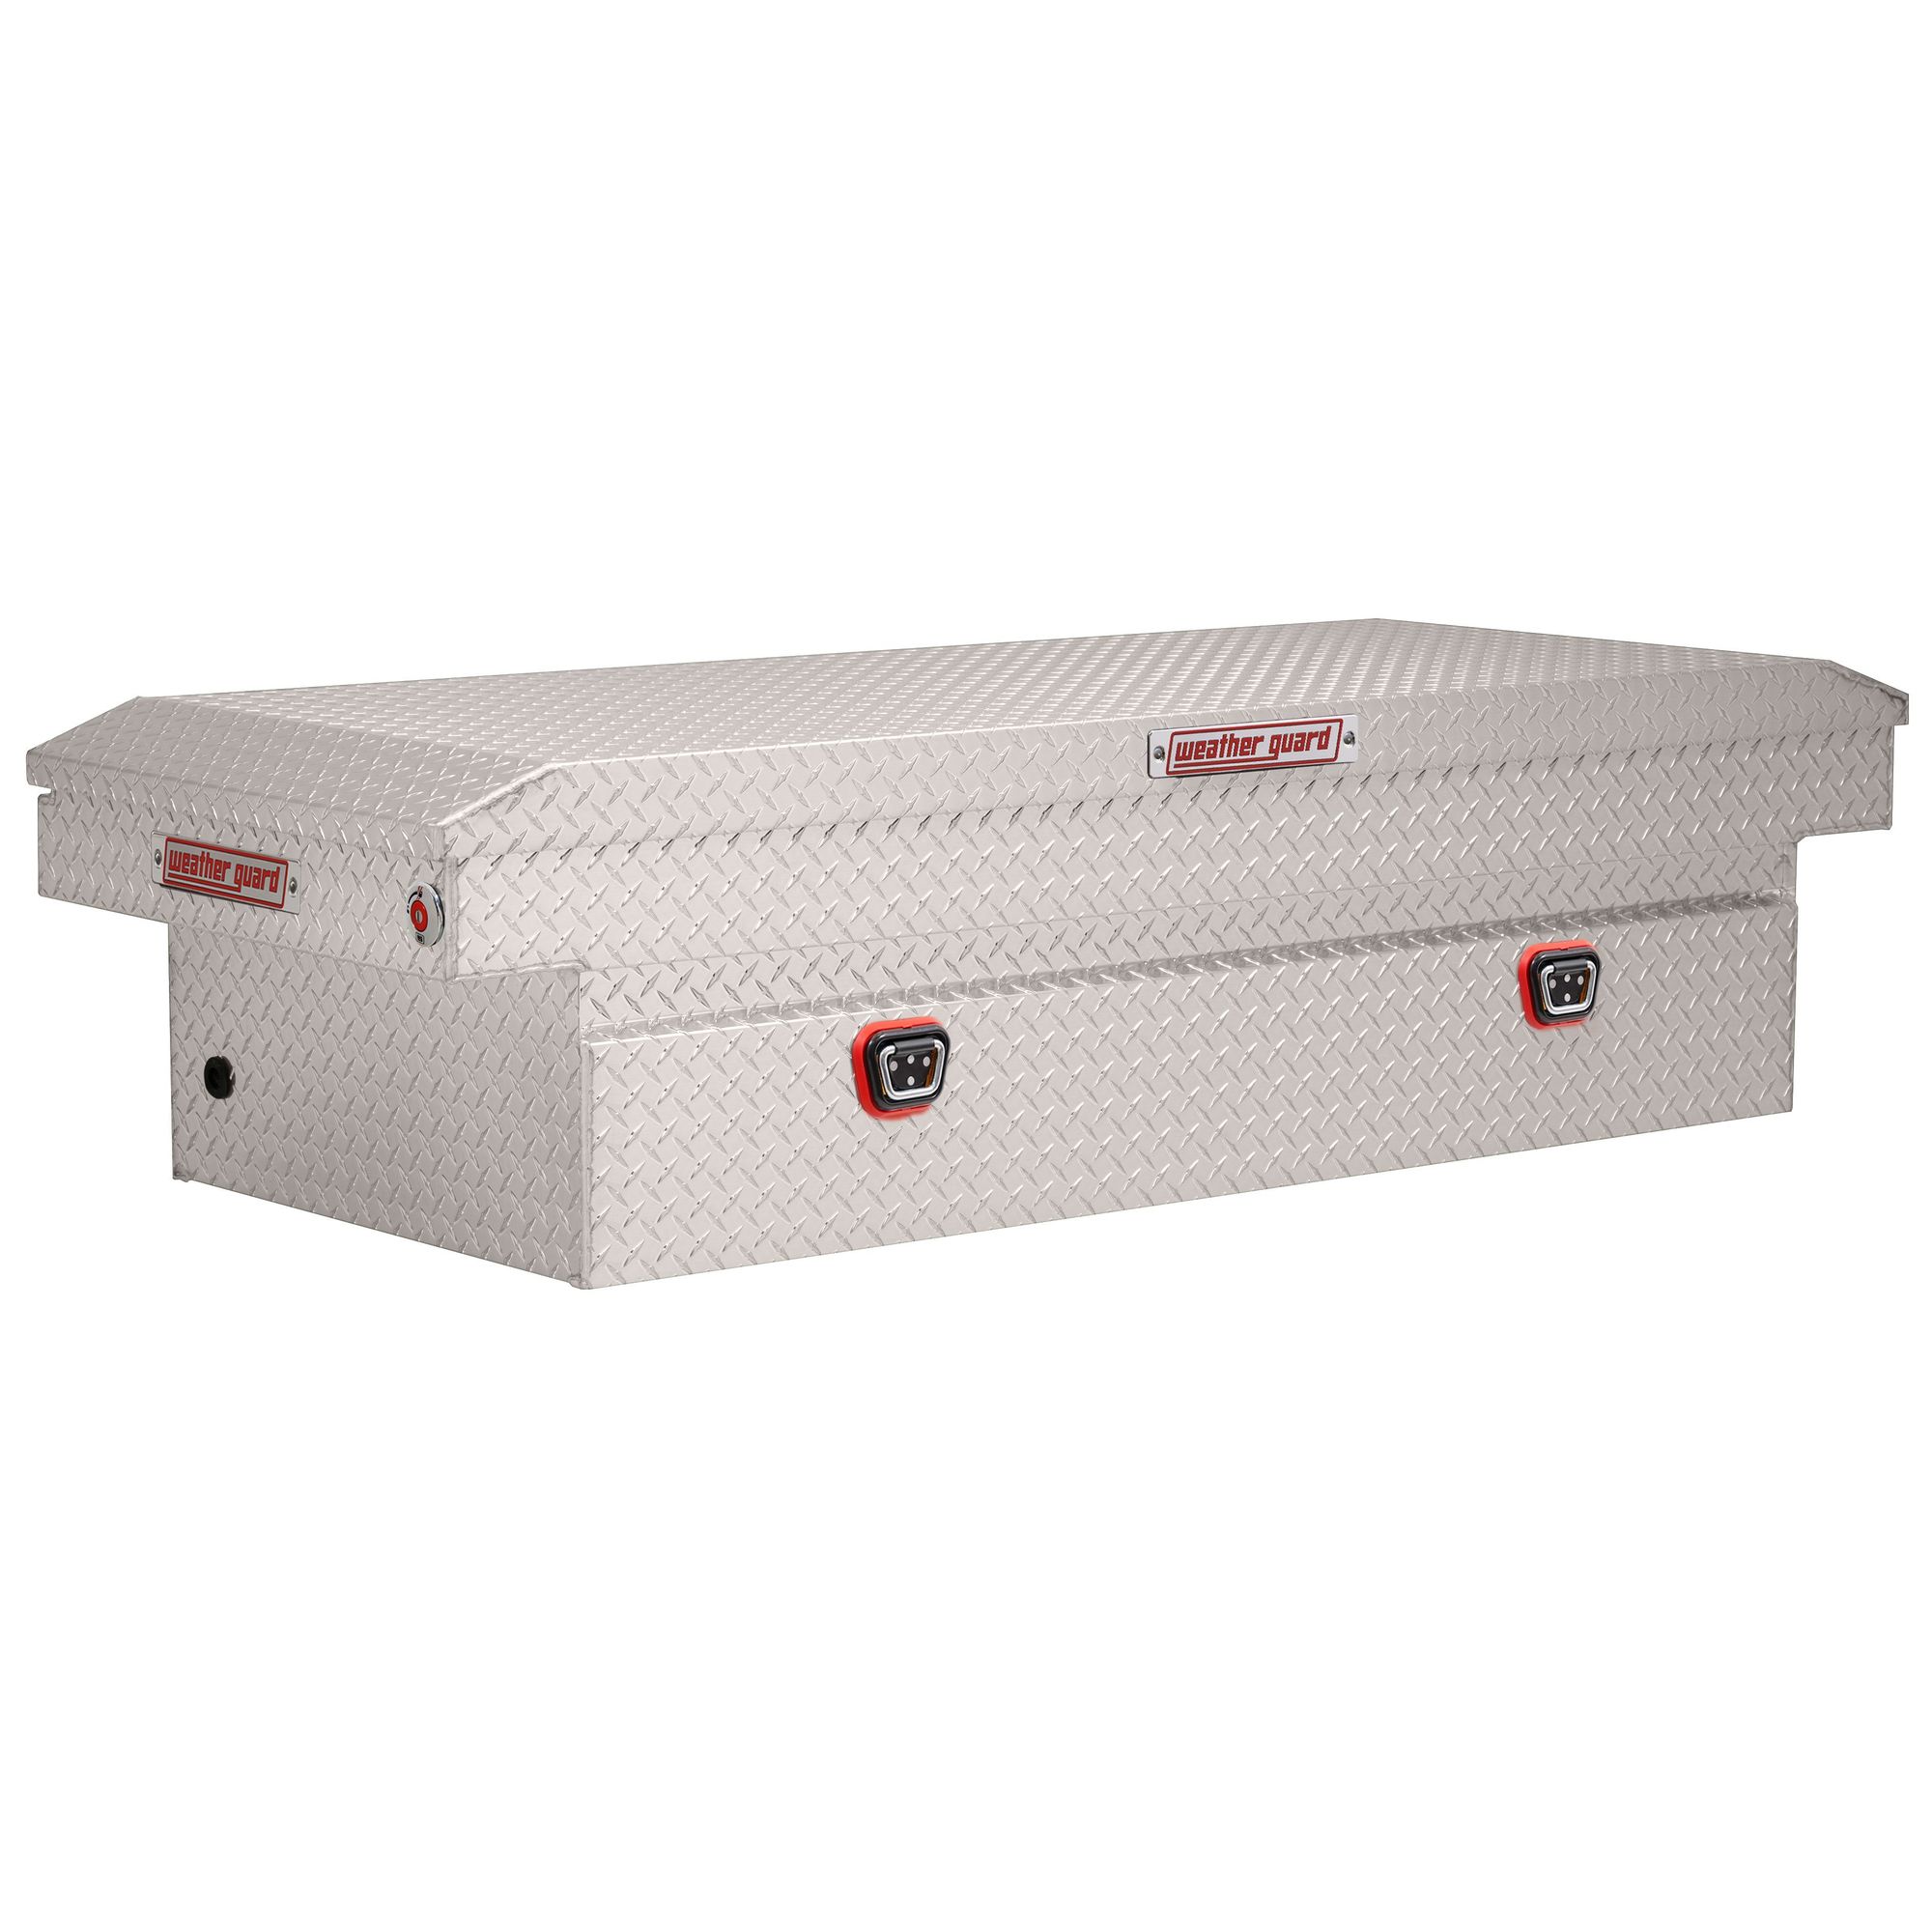 71Inch L Saddle Box, Full Extra Wide, Width 72 in, Material Aluminum, Color Finish Diamond Plate Silver, Model - Weather Guard 117-0-04